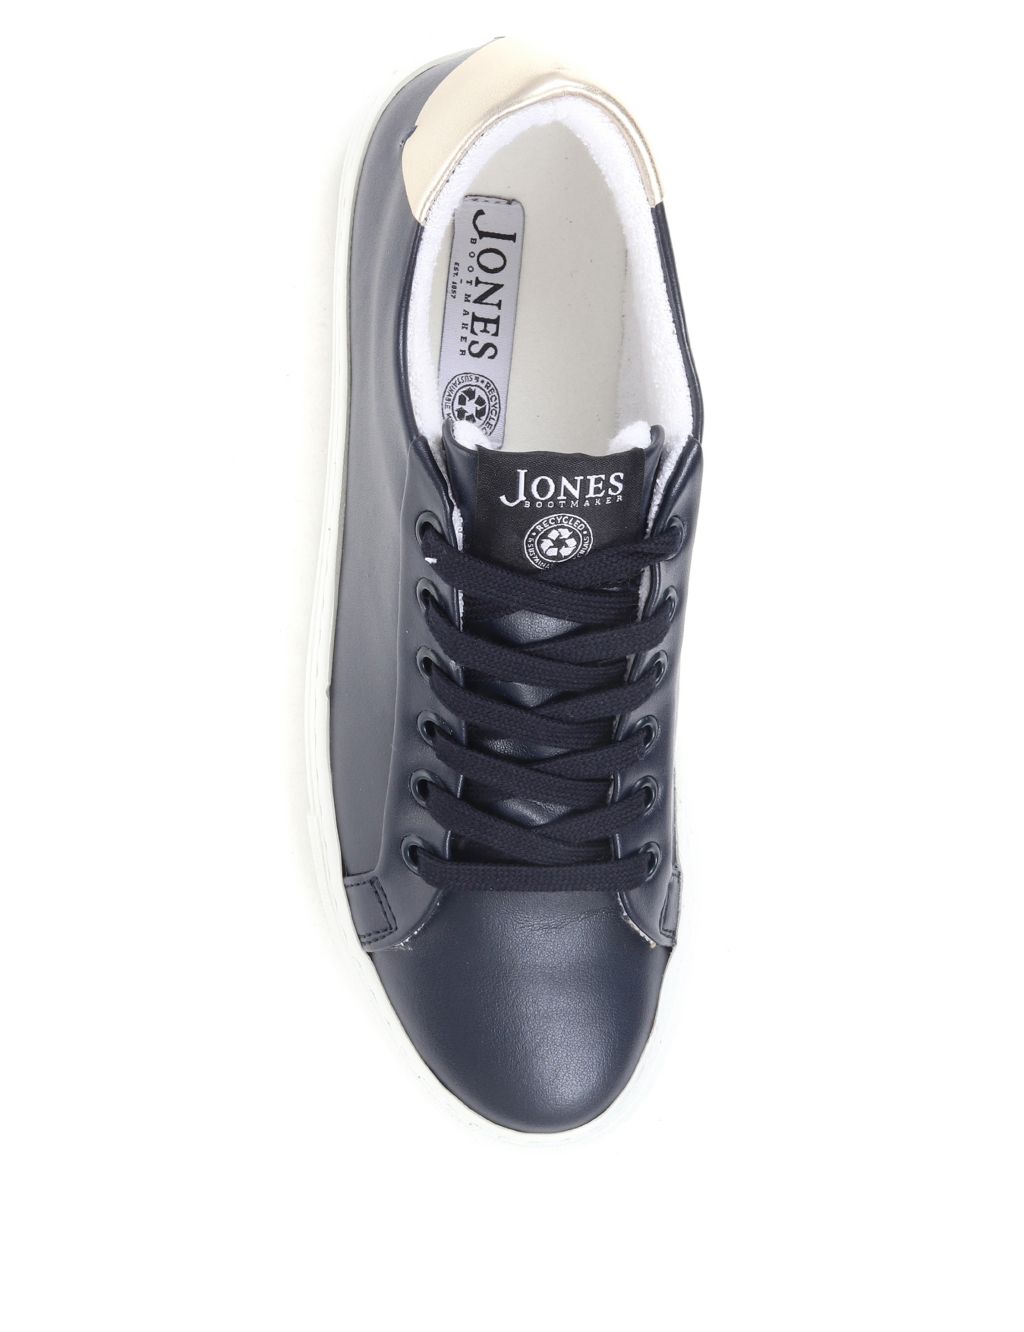 Lace Up Trainers image 2